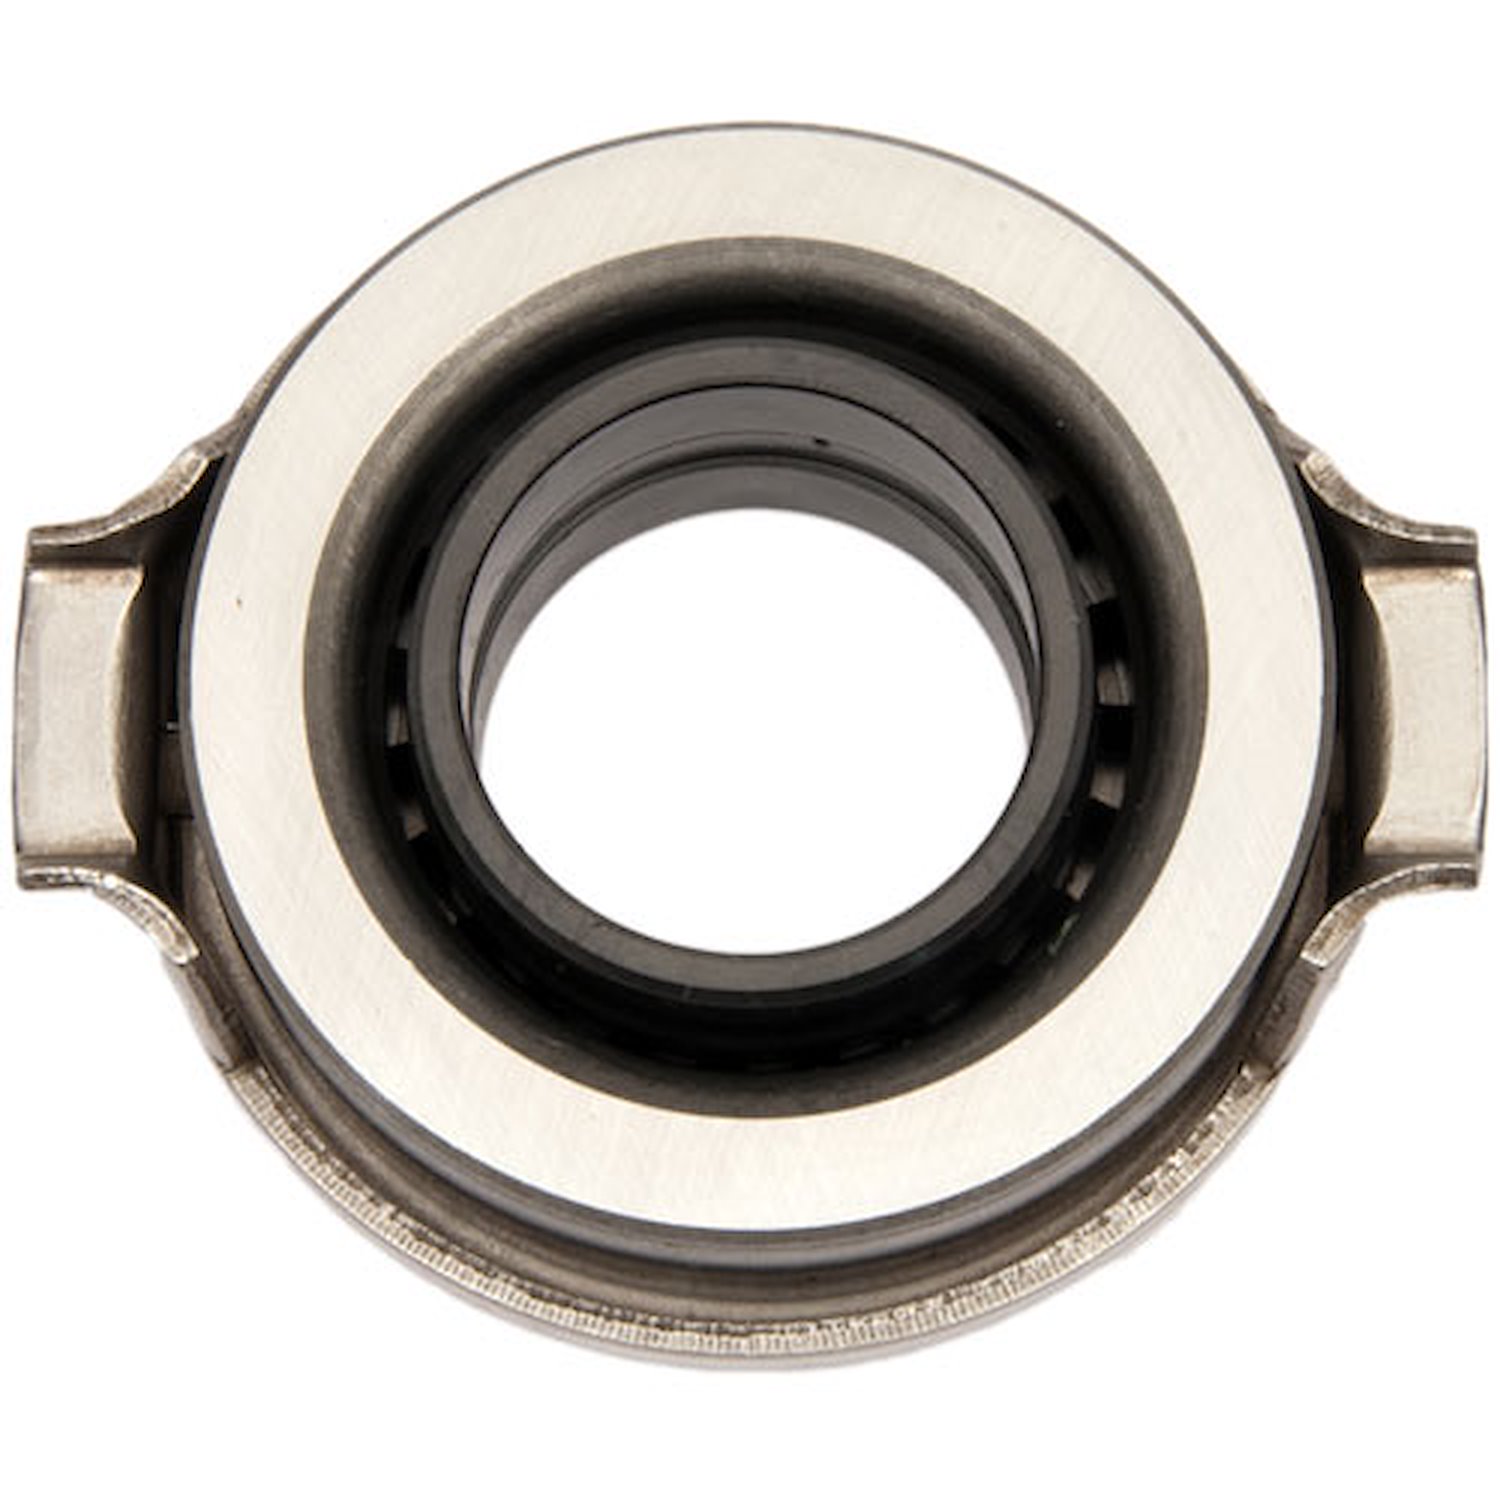 Throwout Bearing 1986-1994 Buick, Chevy, Olds, Pontiac